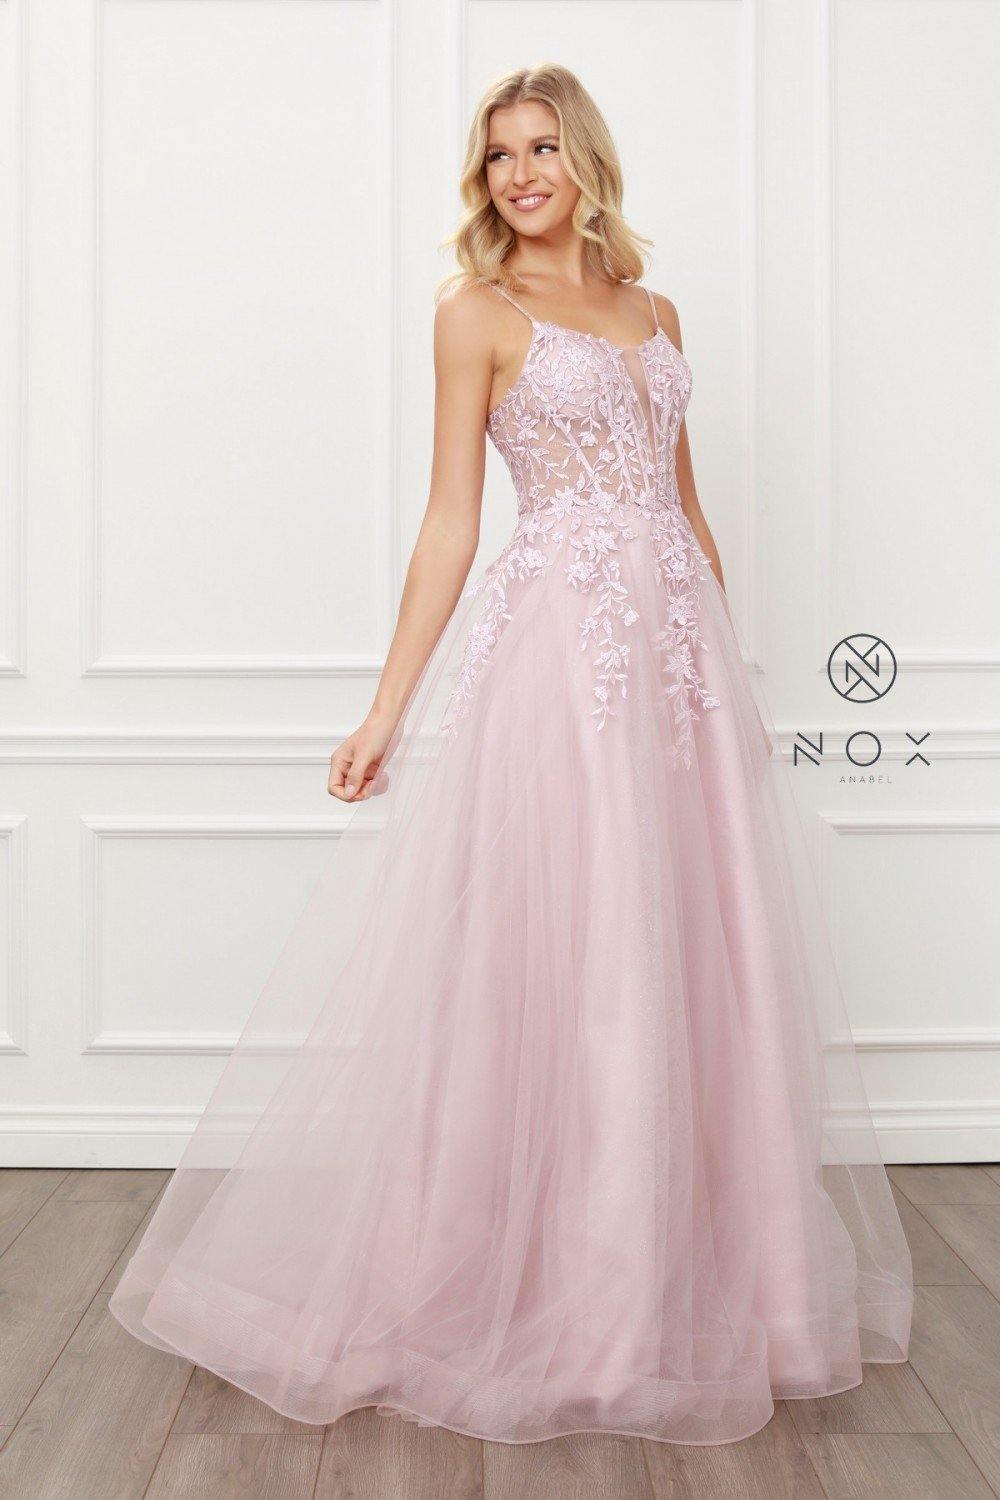 Long Prom Dress Evening Gown - The Dress Outlet